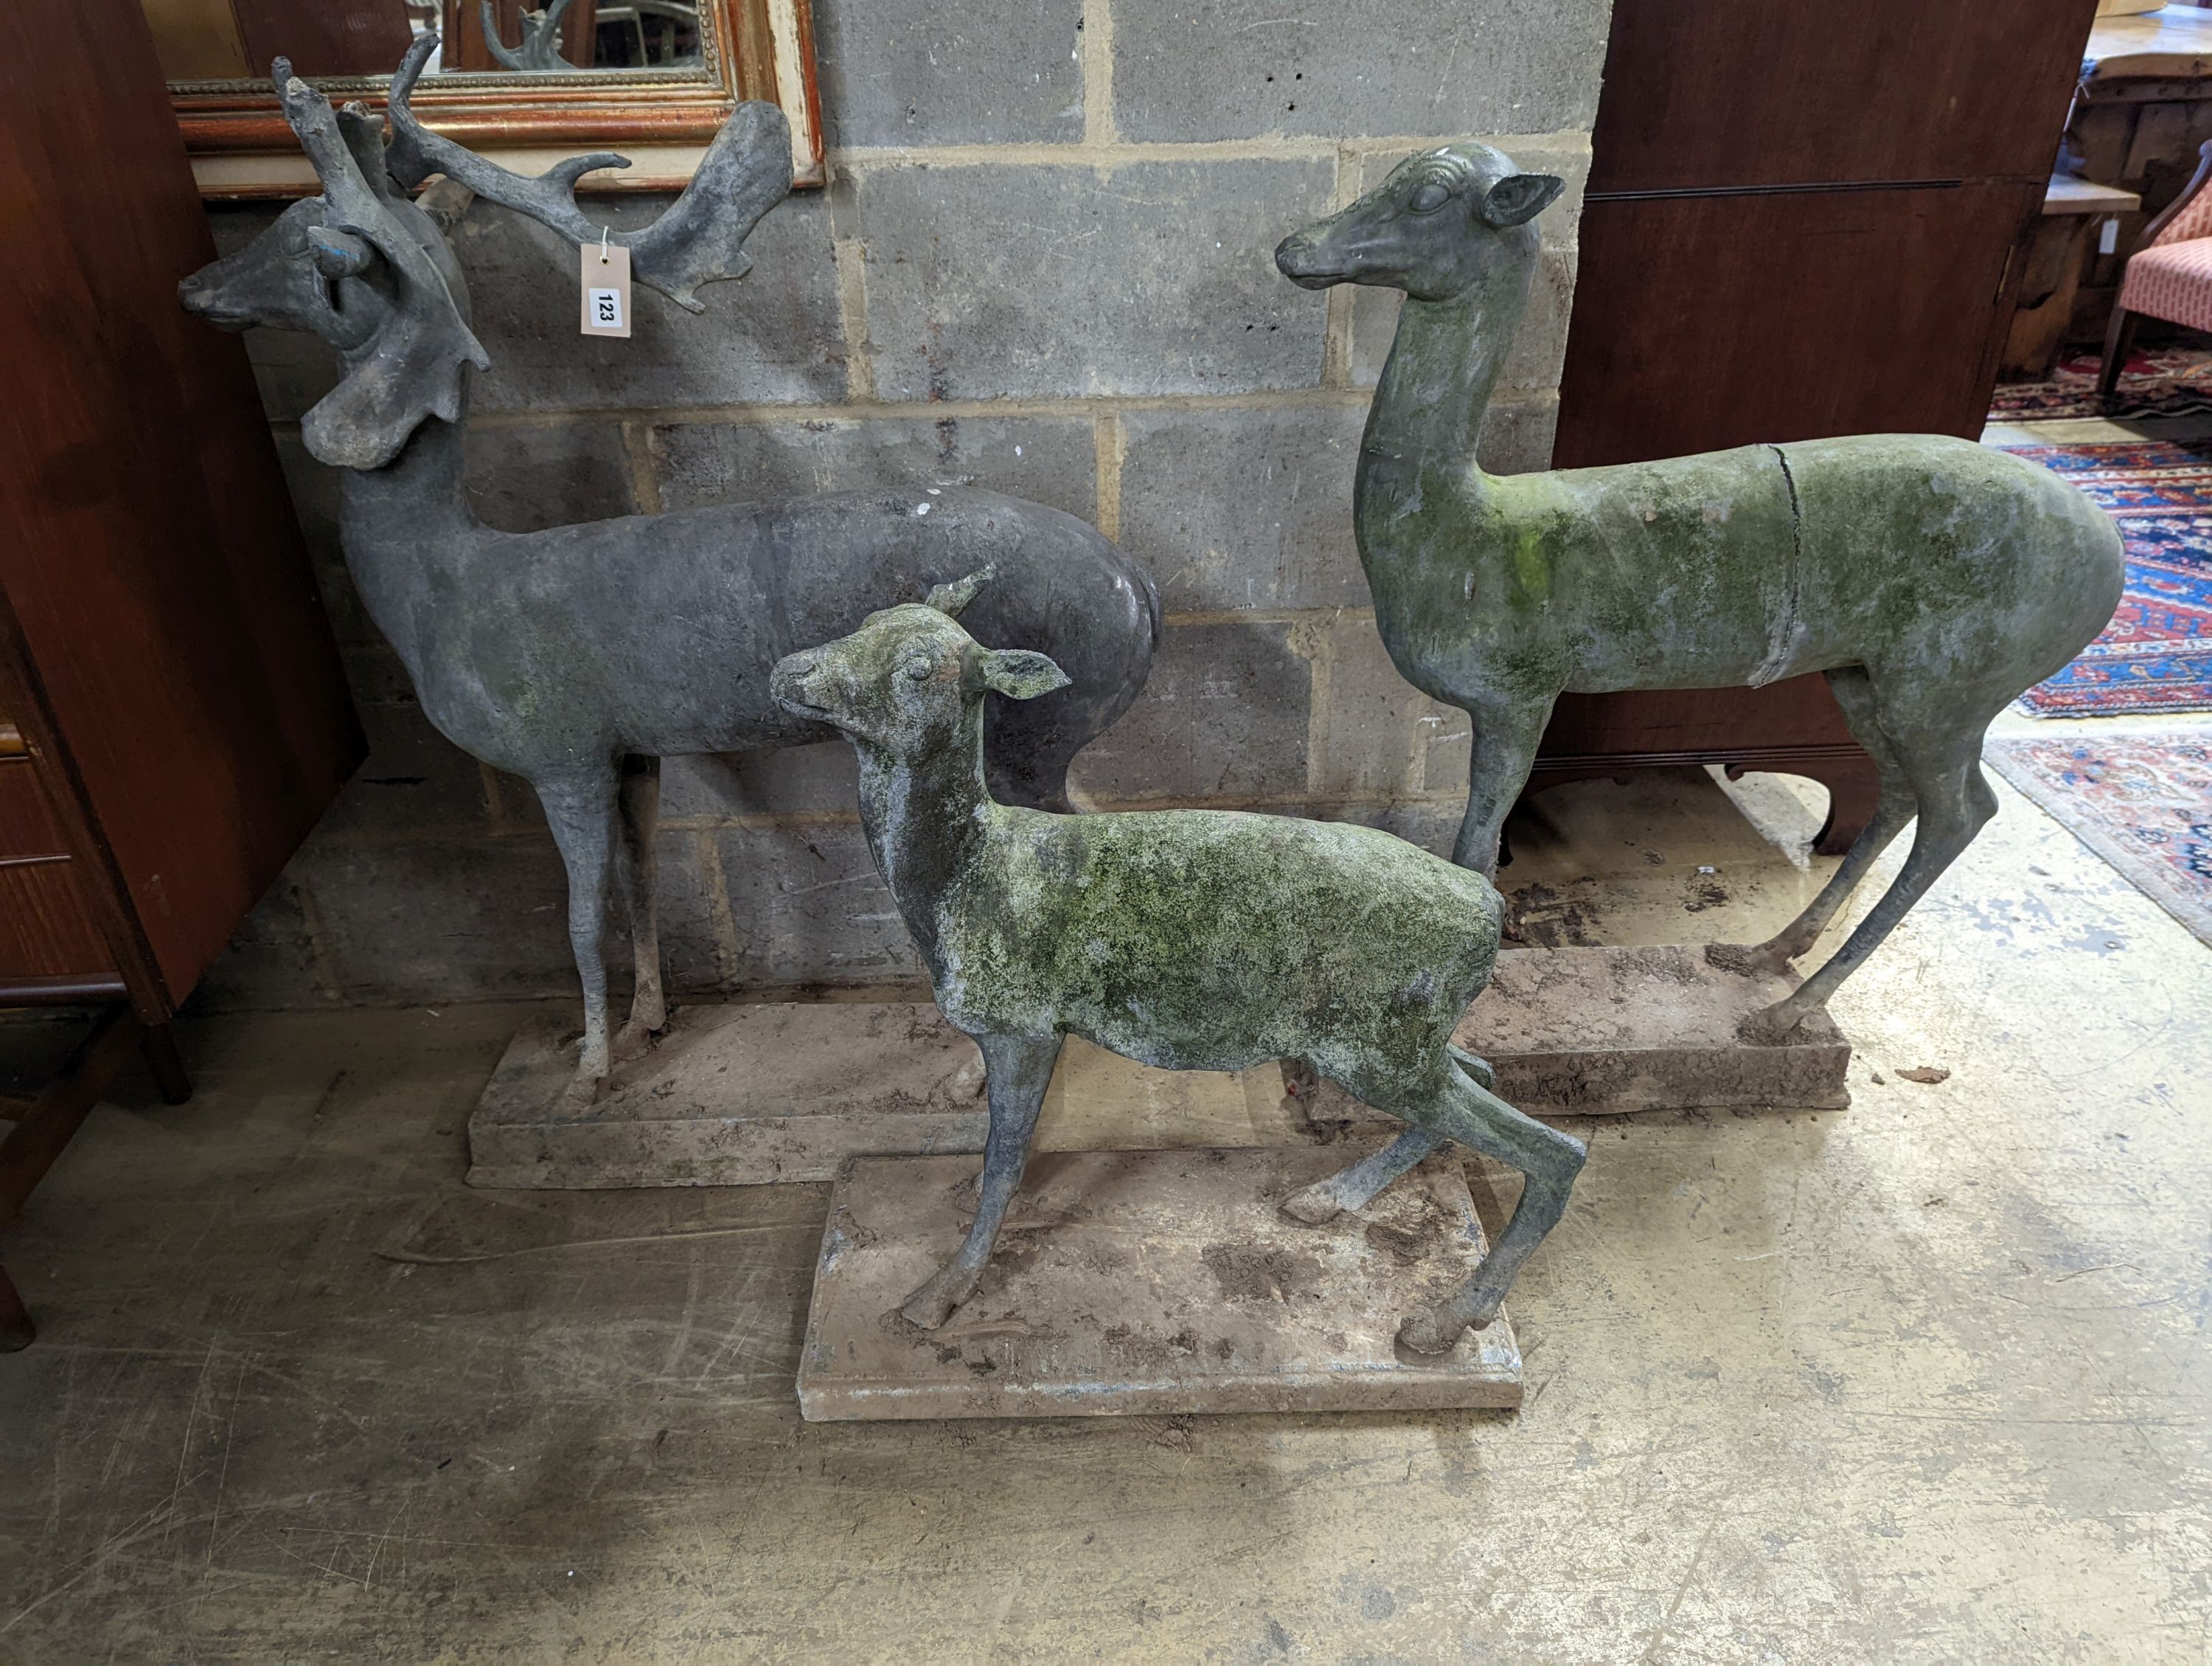 Three lead garden statues modelled as deer, largest height 105cm